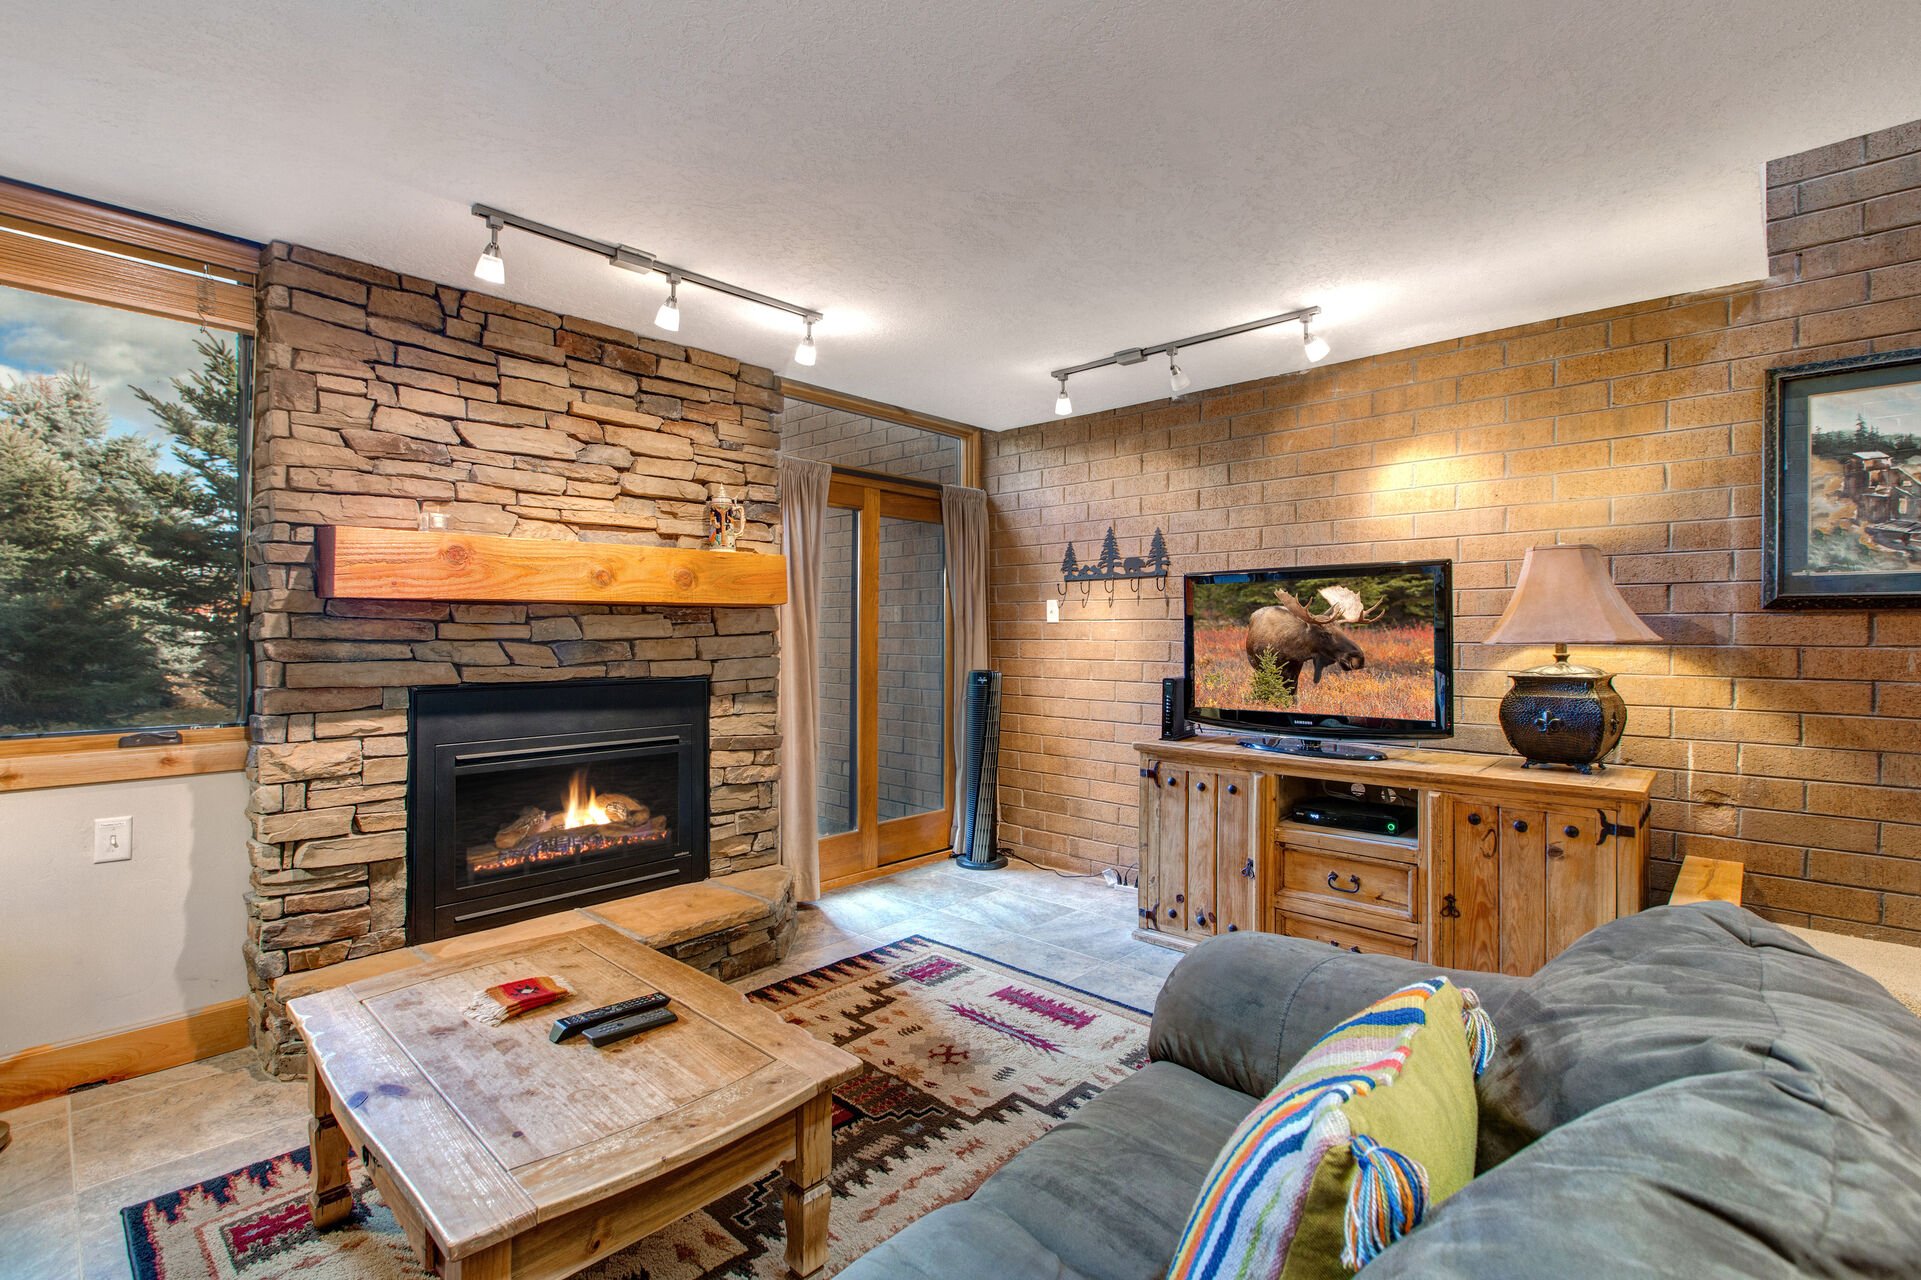 Relax by the Cozy Gas Fireplace After a Long Day of Activities